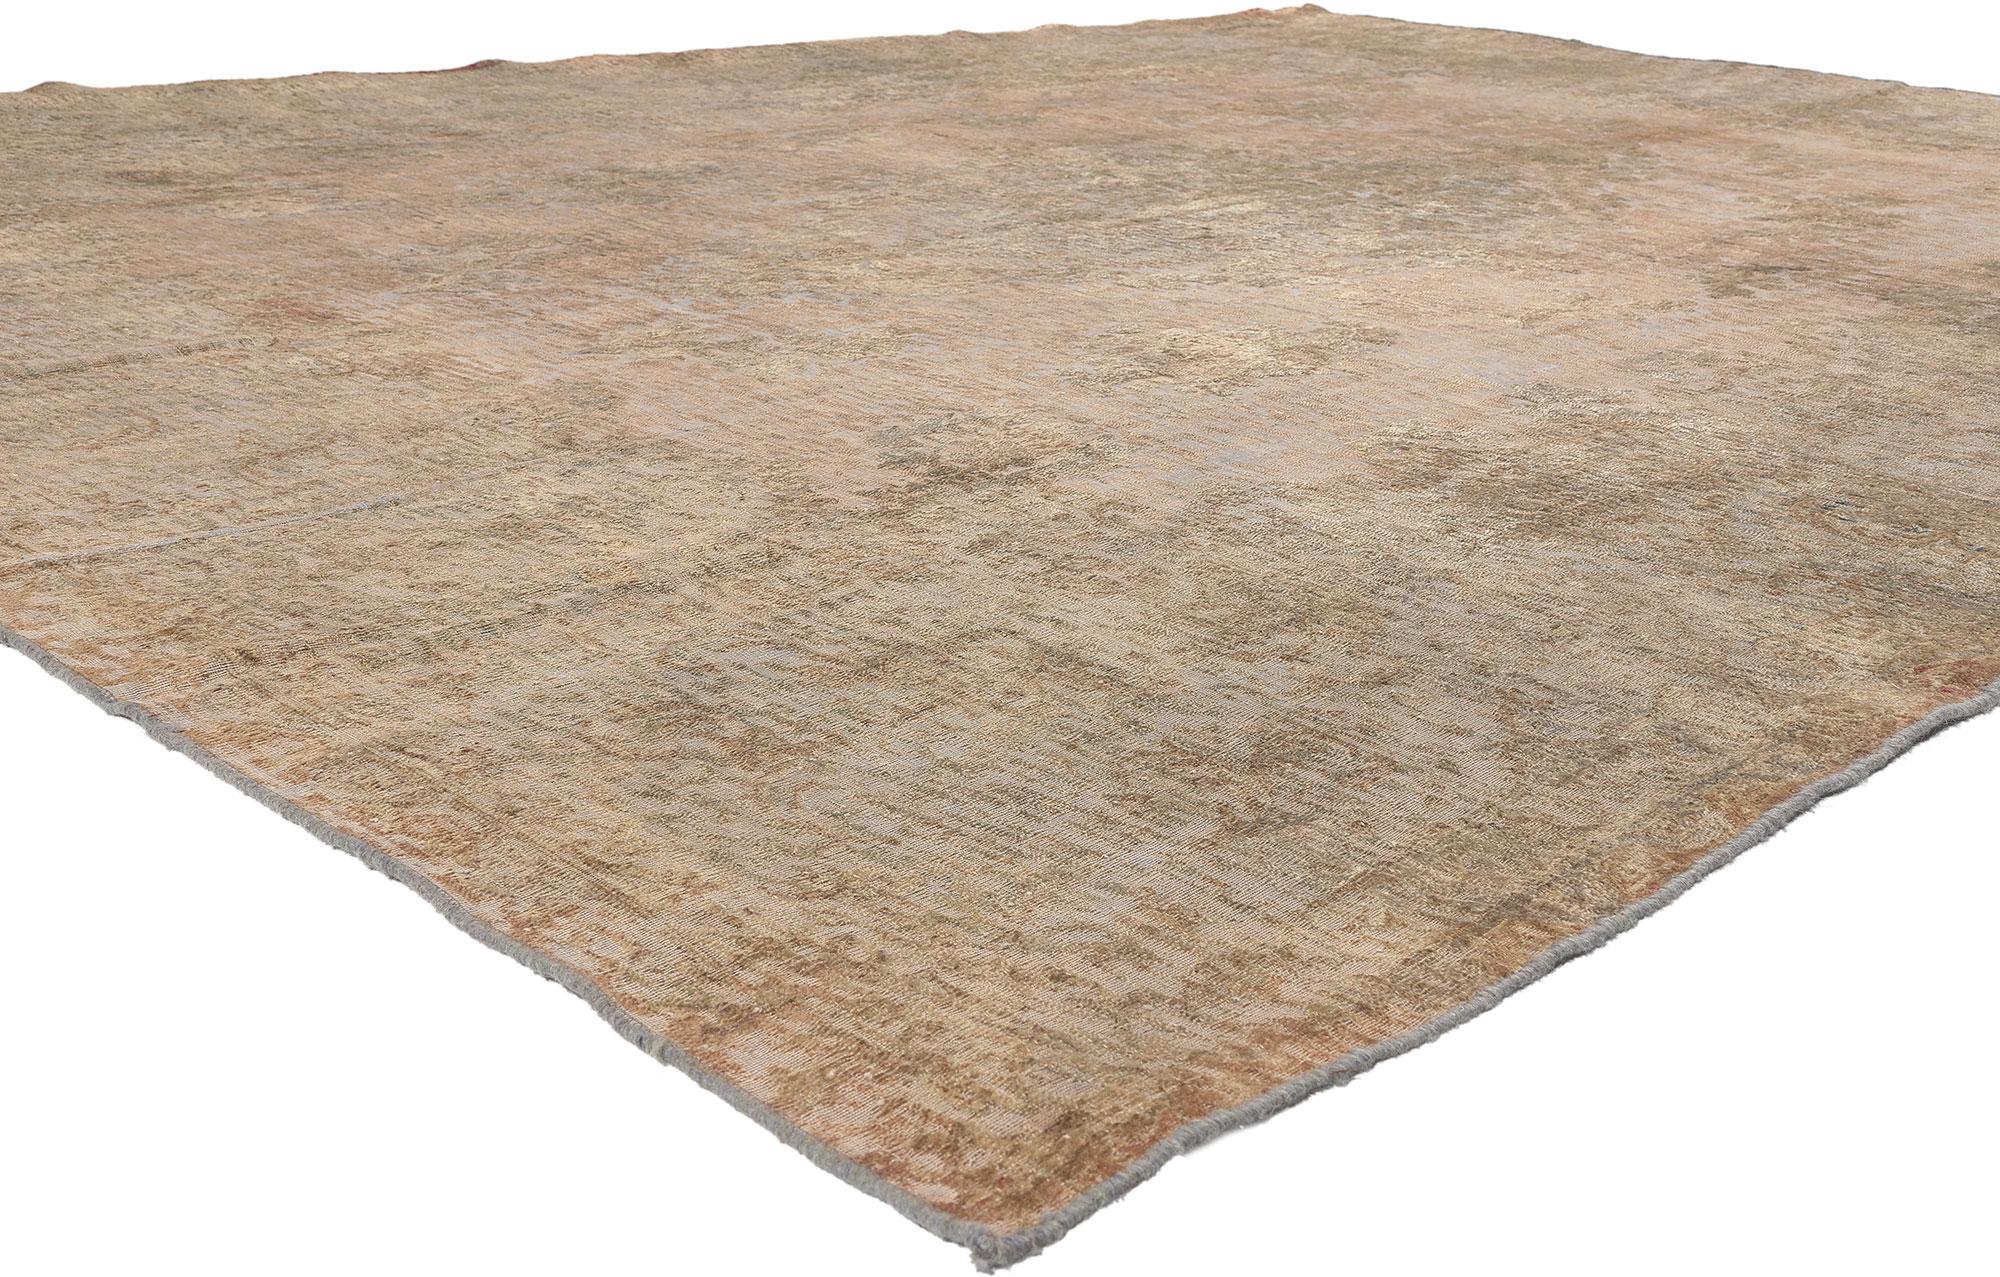 60729 Vintage Turkish Overdyed Rug, 09'03 x 12'08.
Belgian Chic meets French Industrial in this hand knotted wool vintage Turkish overdyed rug. The faded botanical design and neutral earth-tone colors in this piece work together delivering a warm